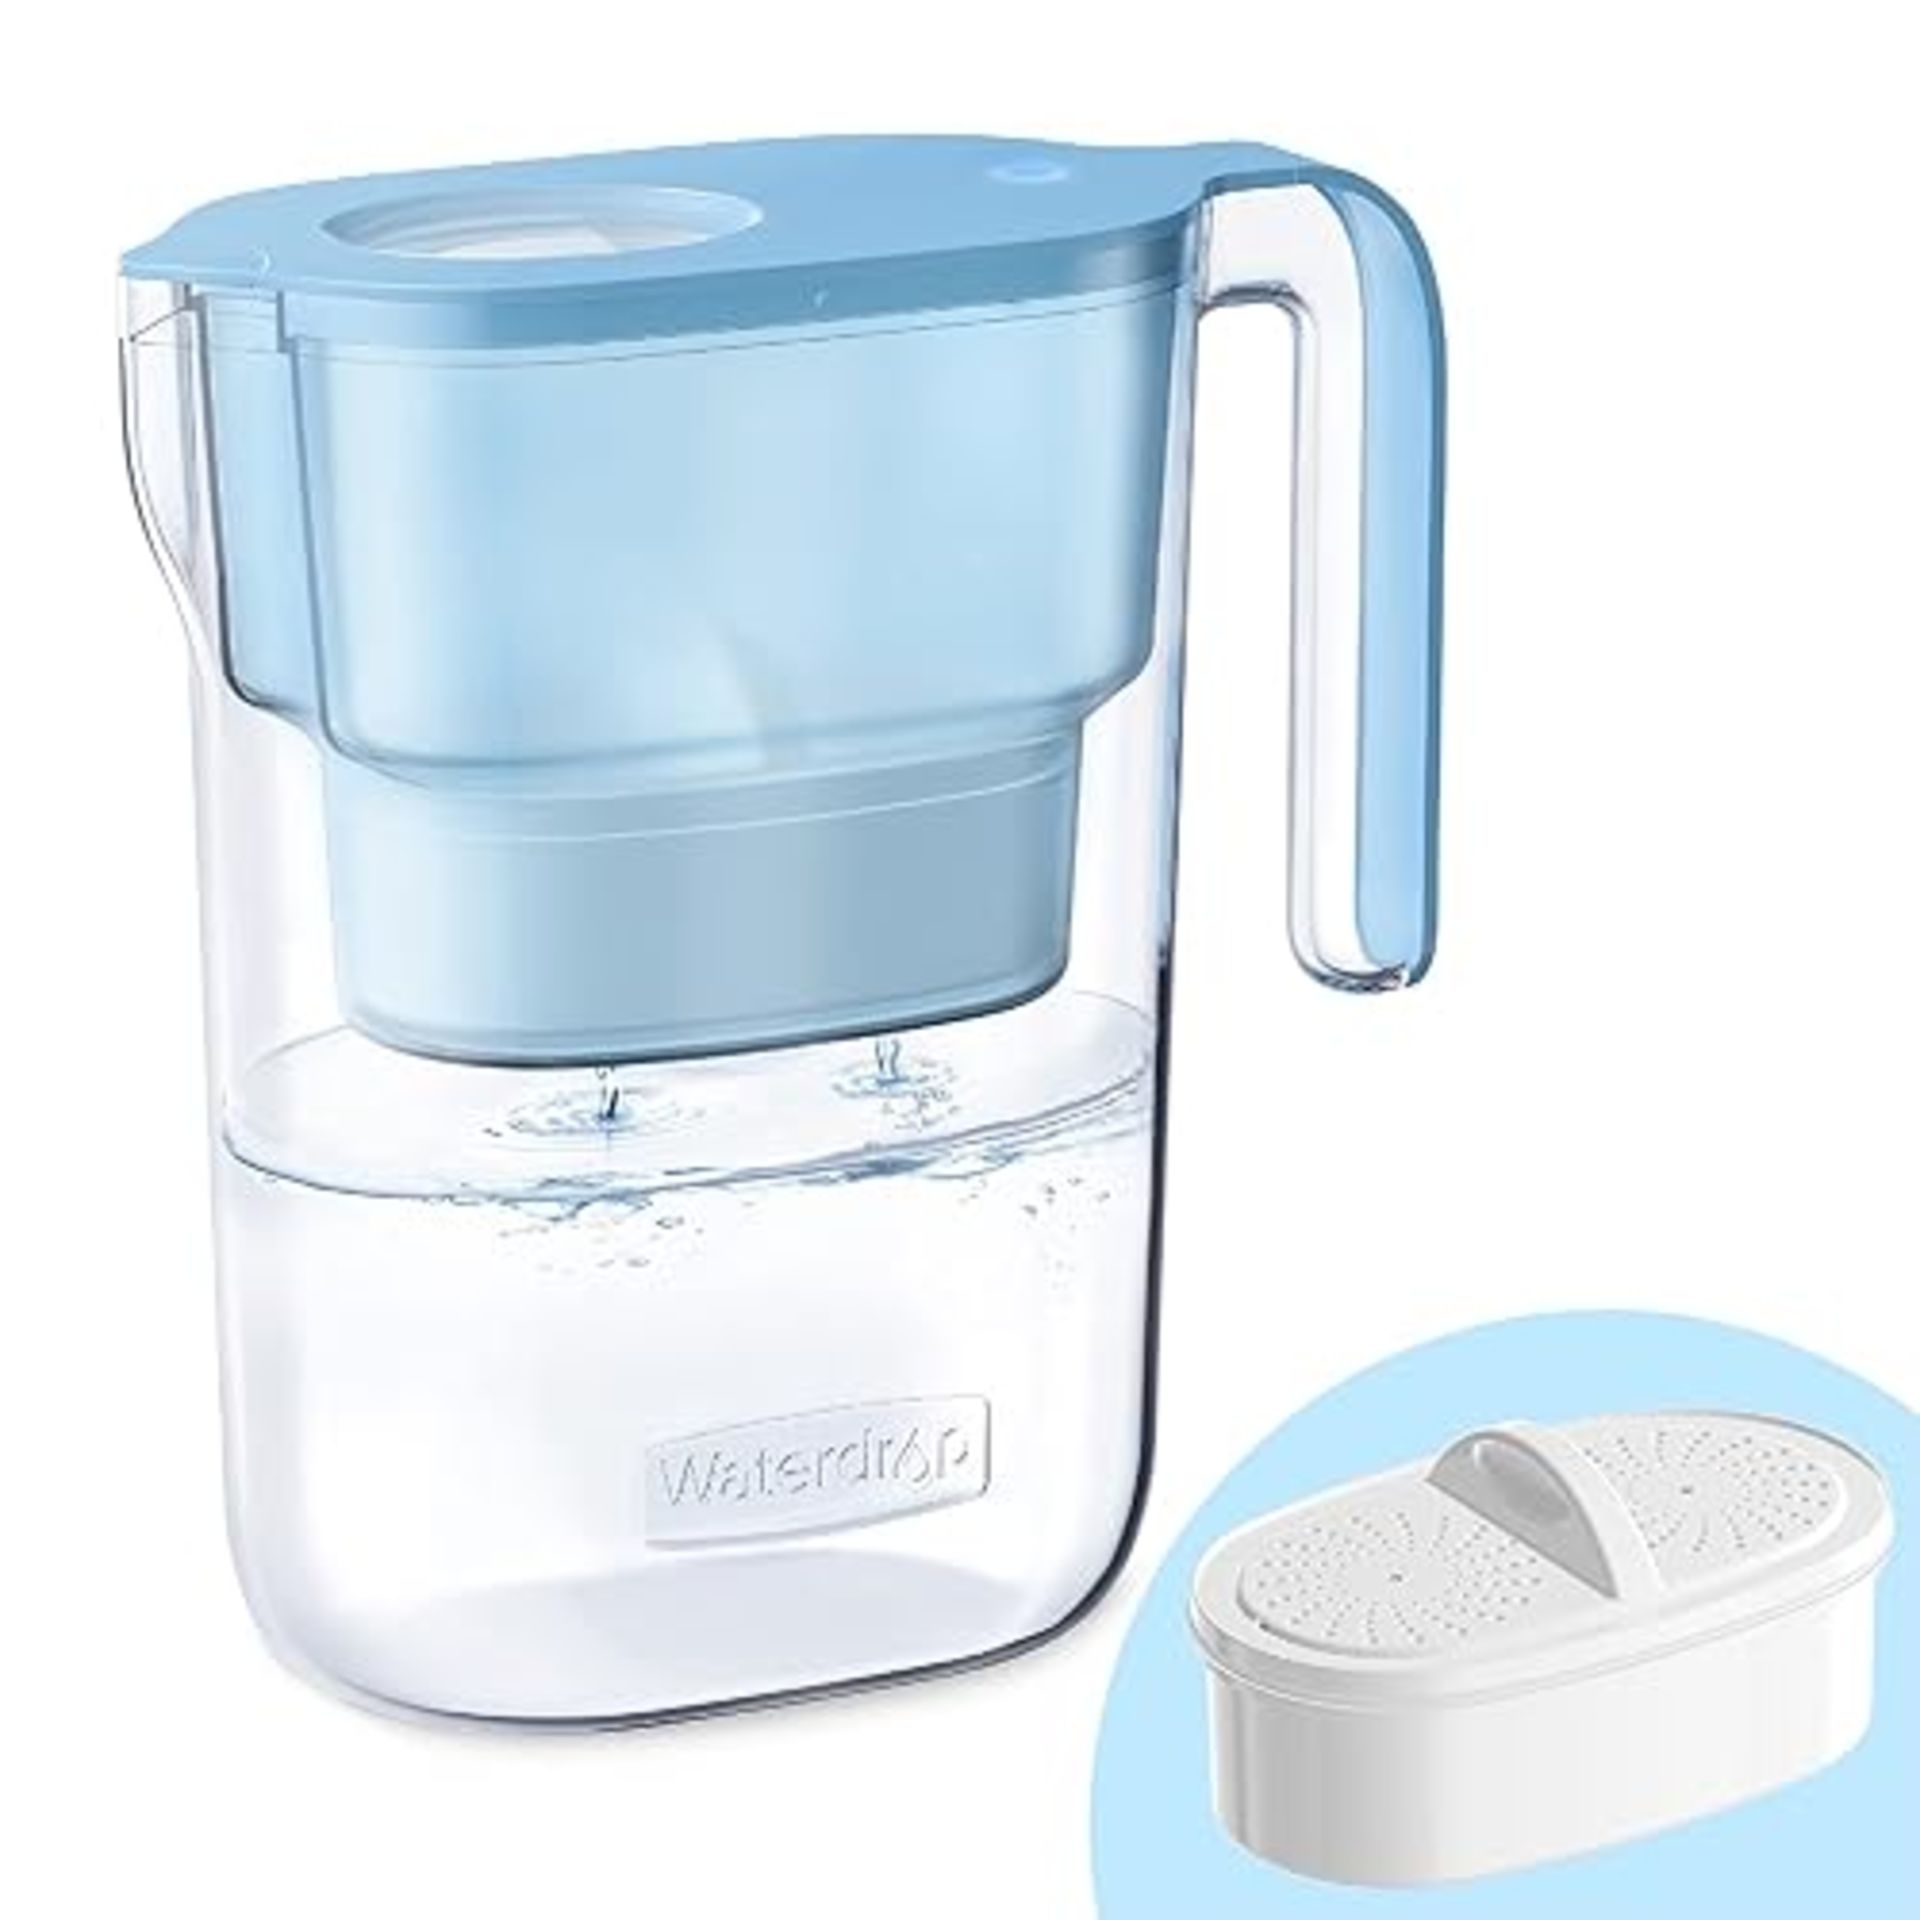 Waterdrop Elfin Fridge Water Filter Jug with 3 Months Filter, 2.5L, Reduces Fluoride, Chlorine and 